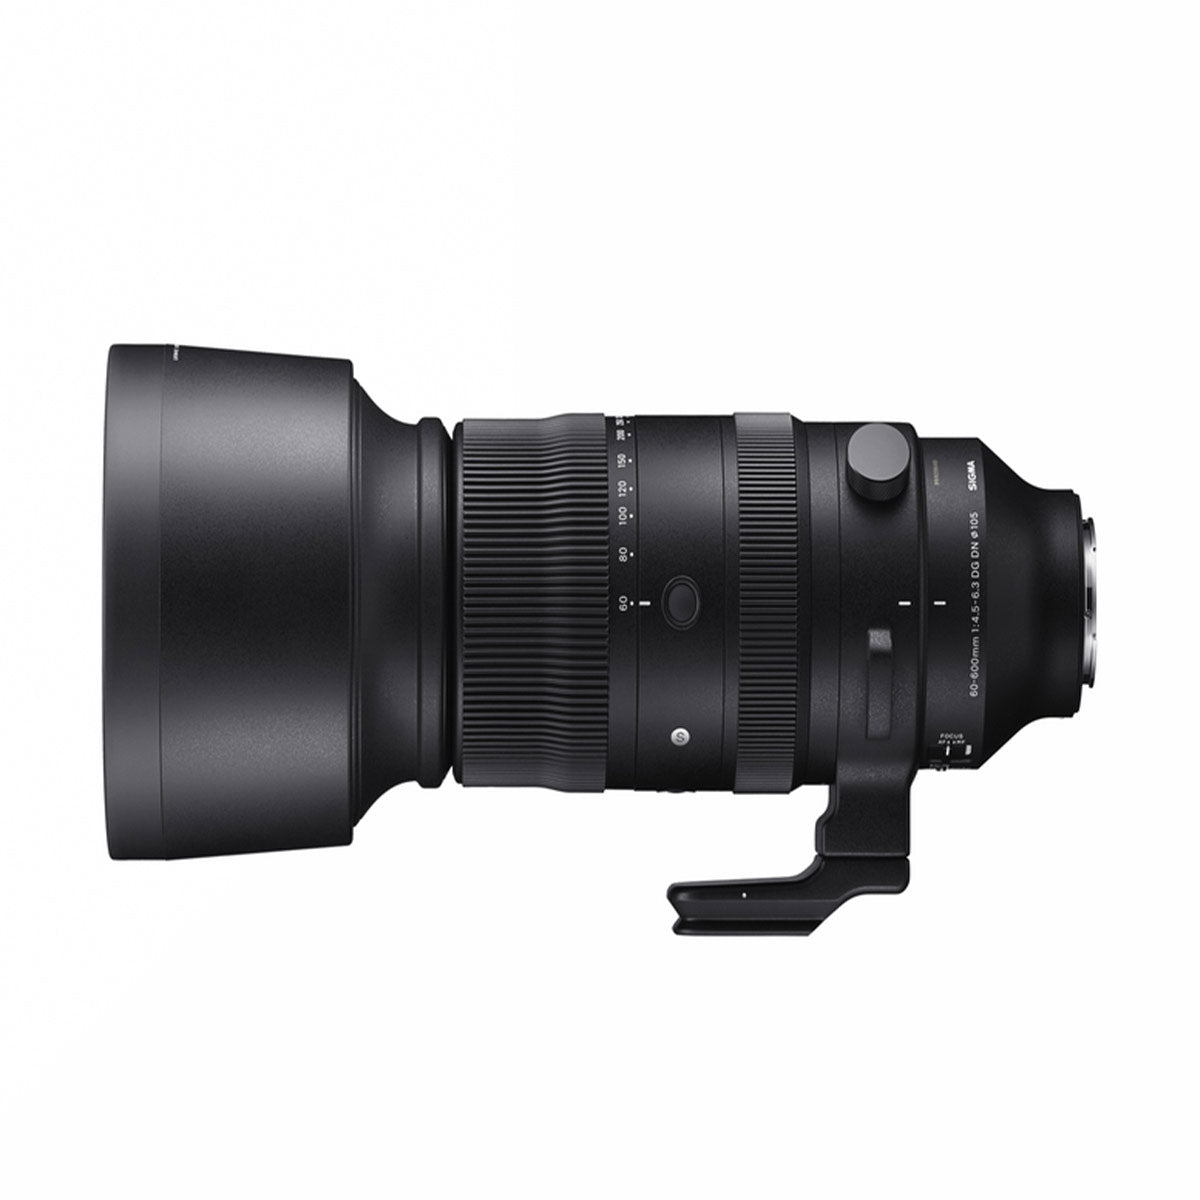 Sigma 60-600mm f/4.5-6.3 DG DN OS Sports Lens for Sony FE *OPEN BOX*